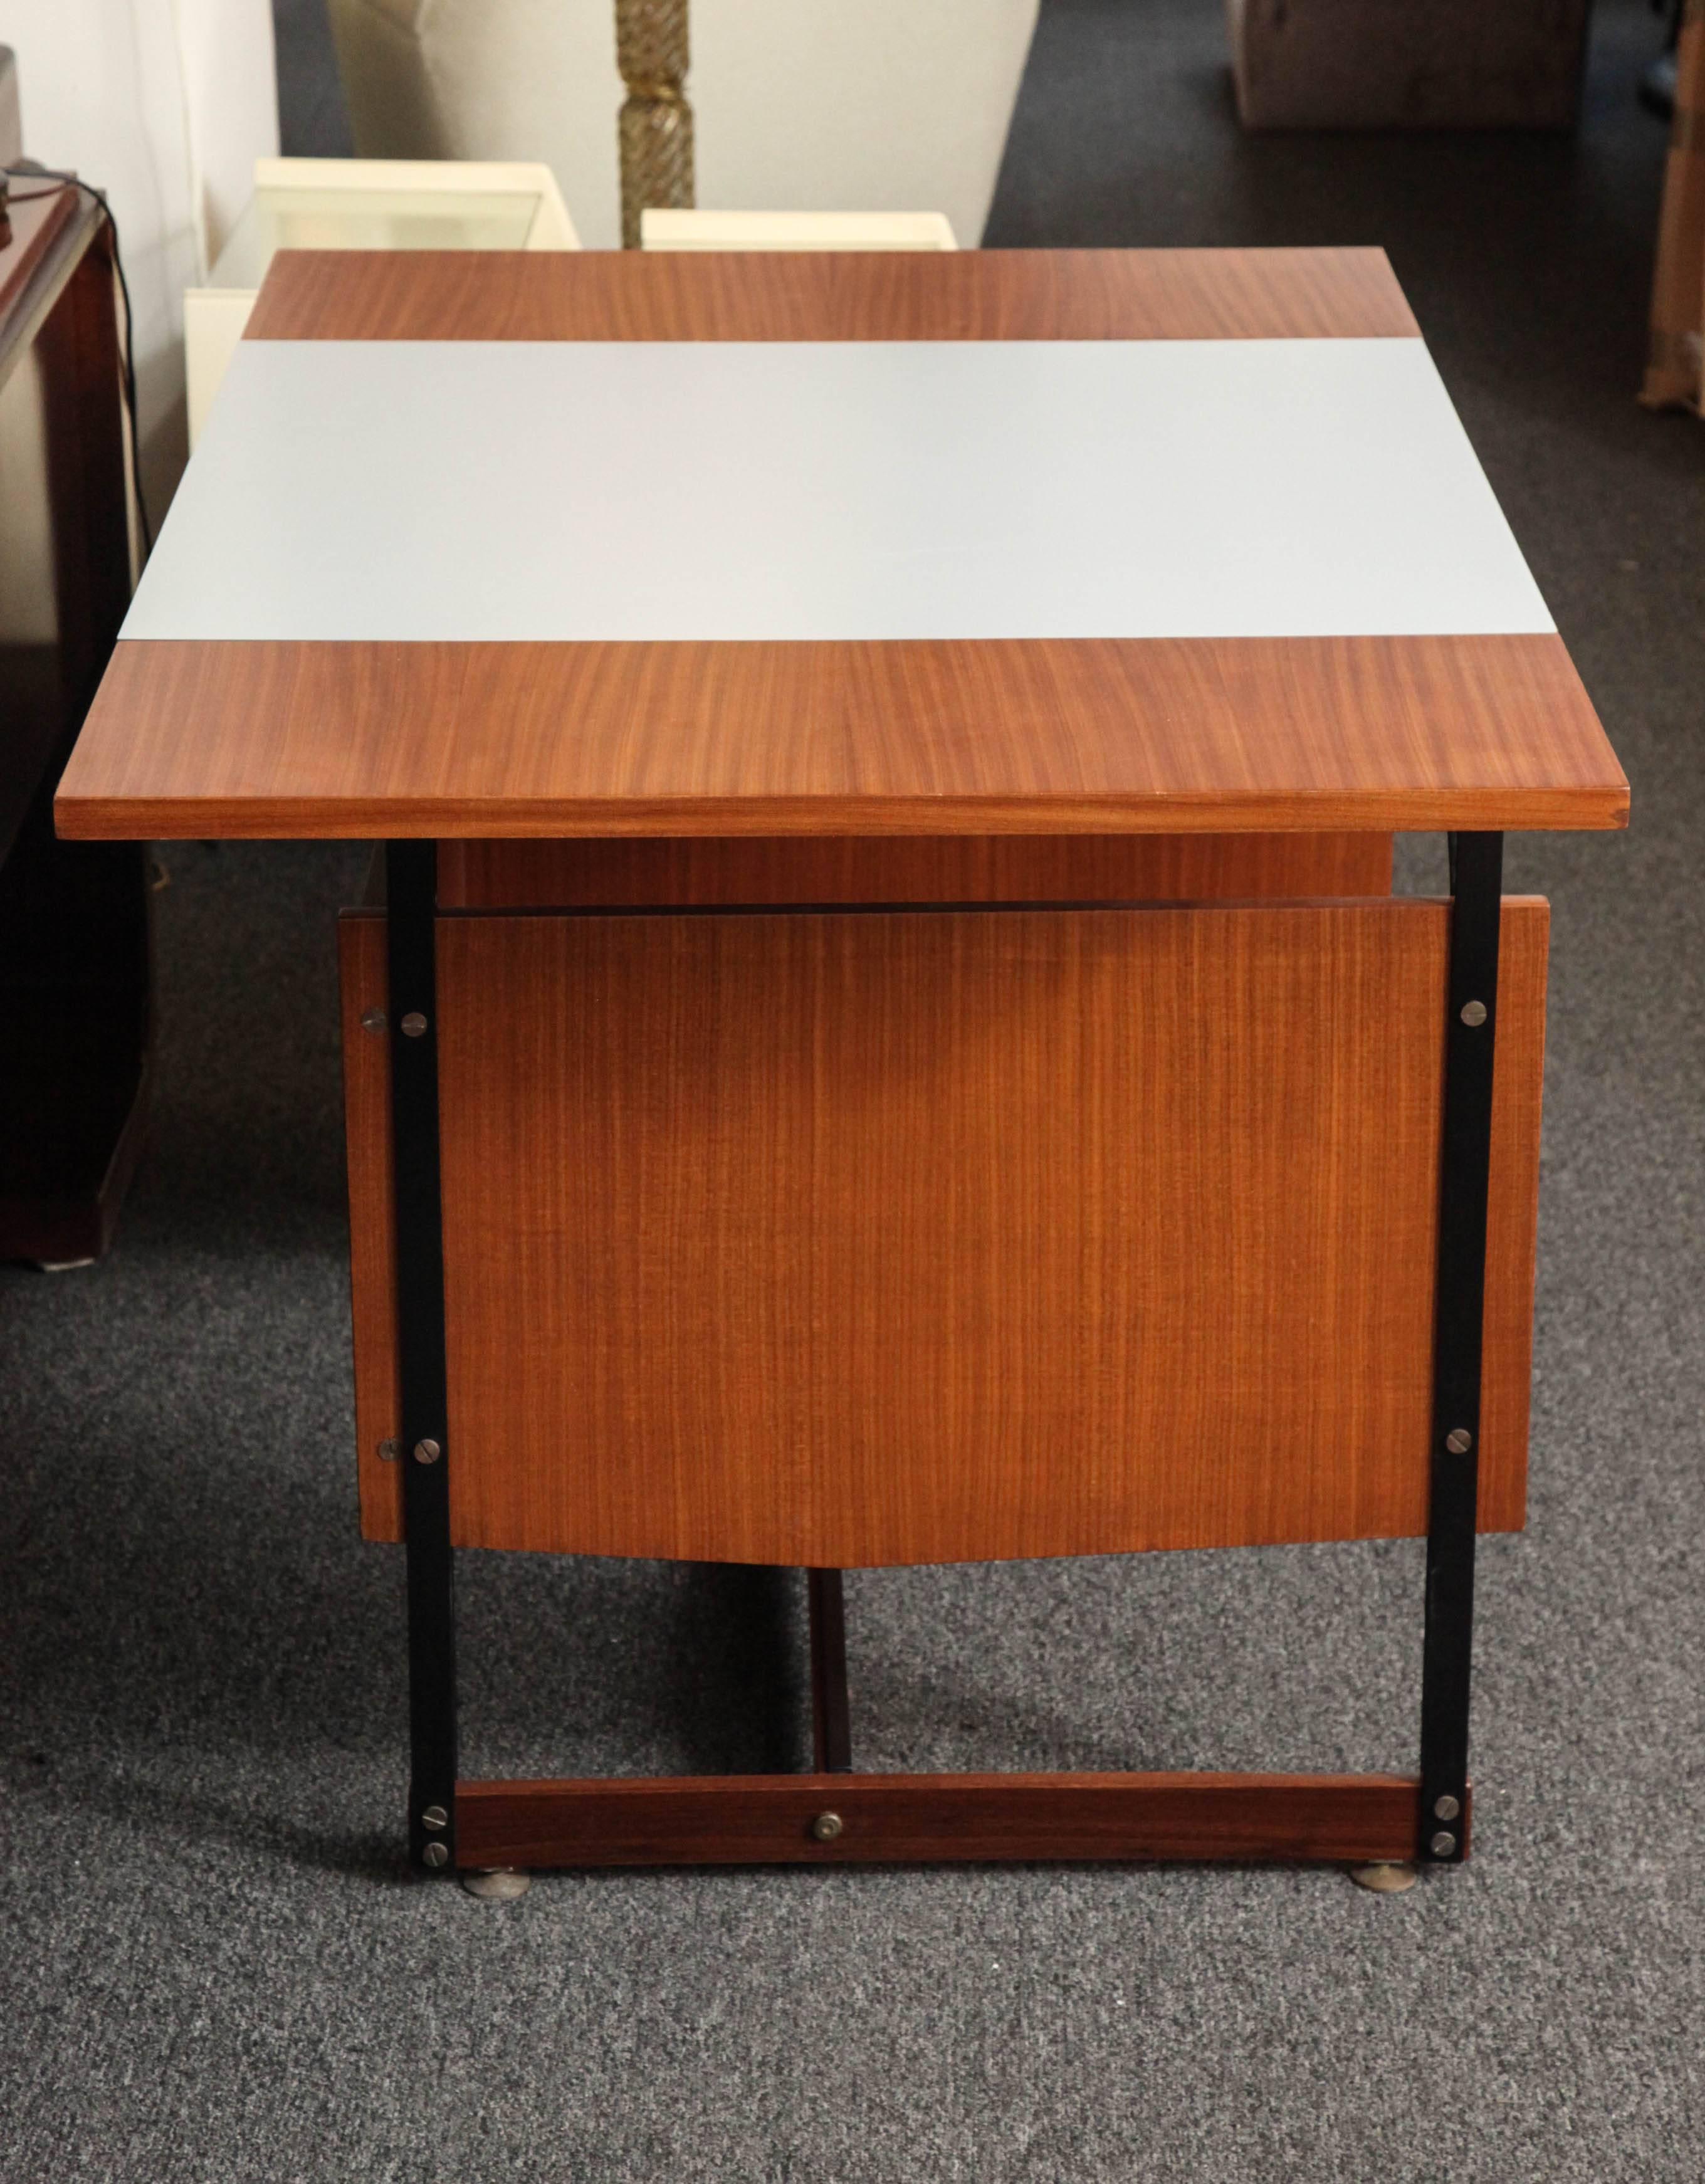 Modernist Desk Made in Italy in 1955 In Excellent Condition For Sale In New York, NY